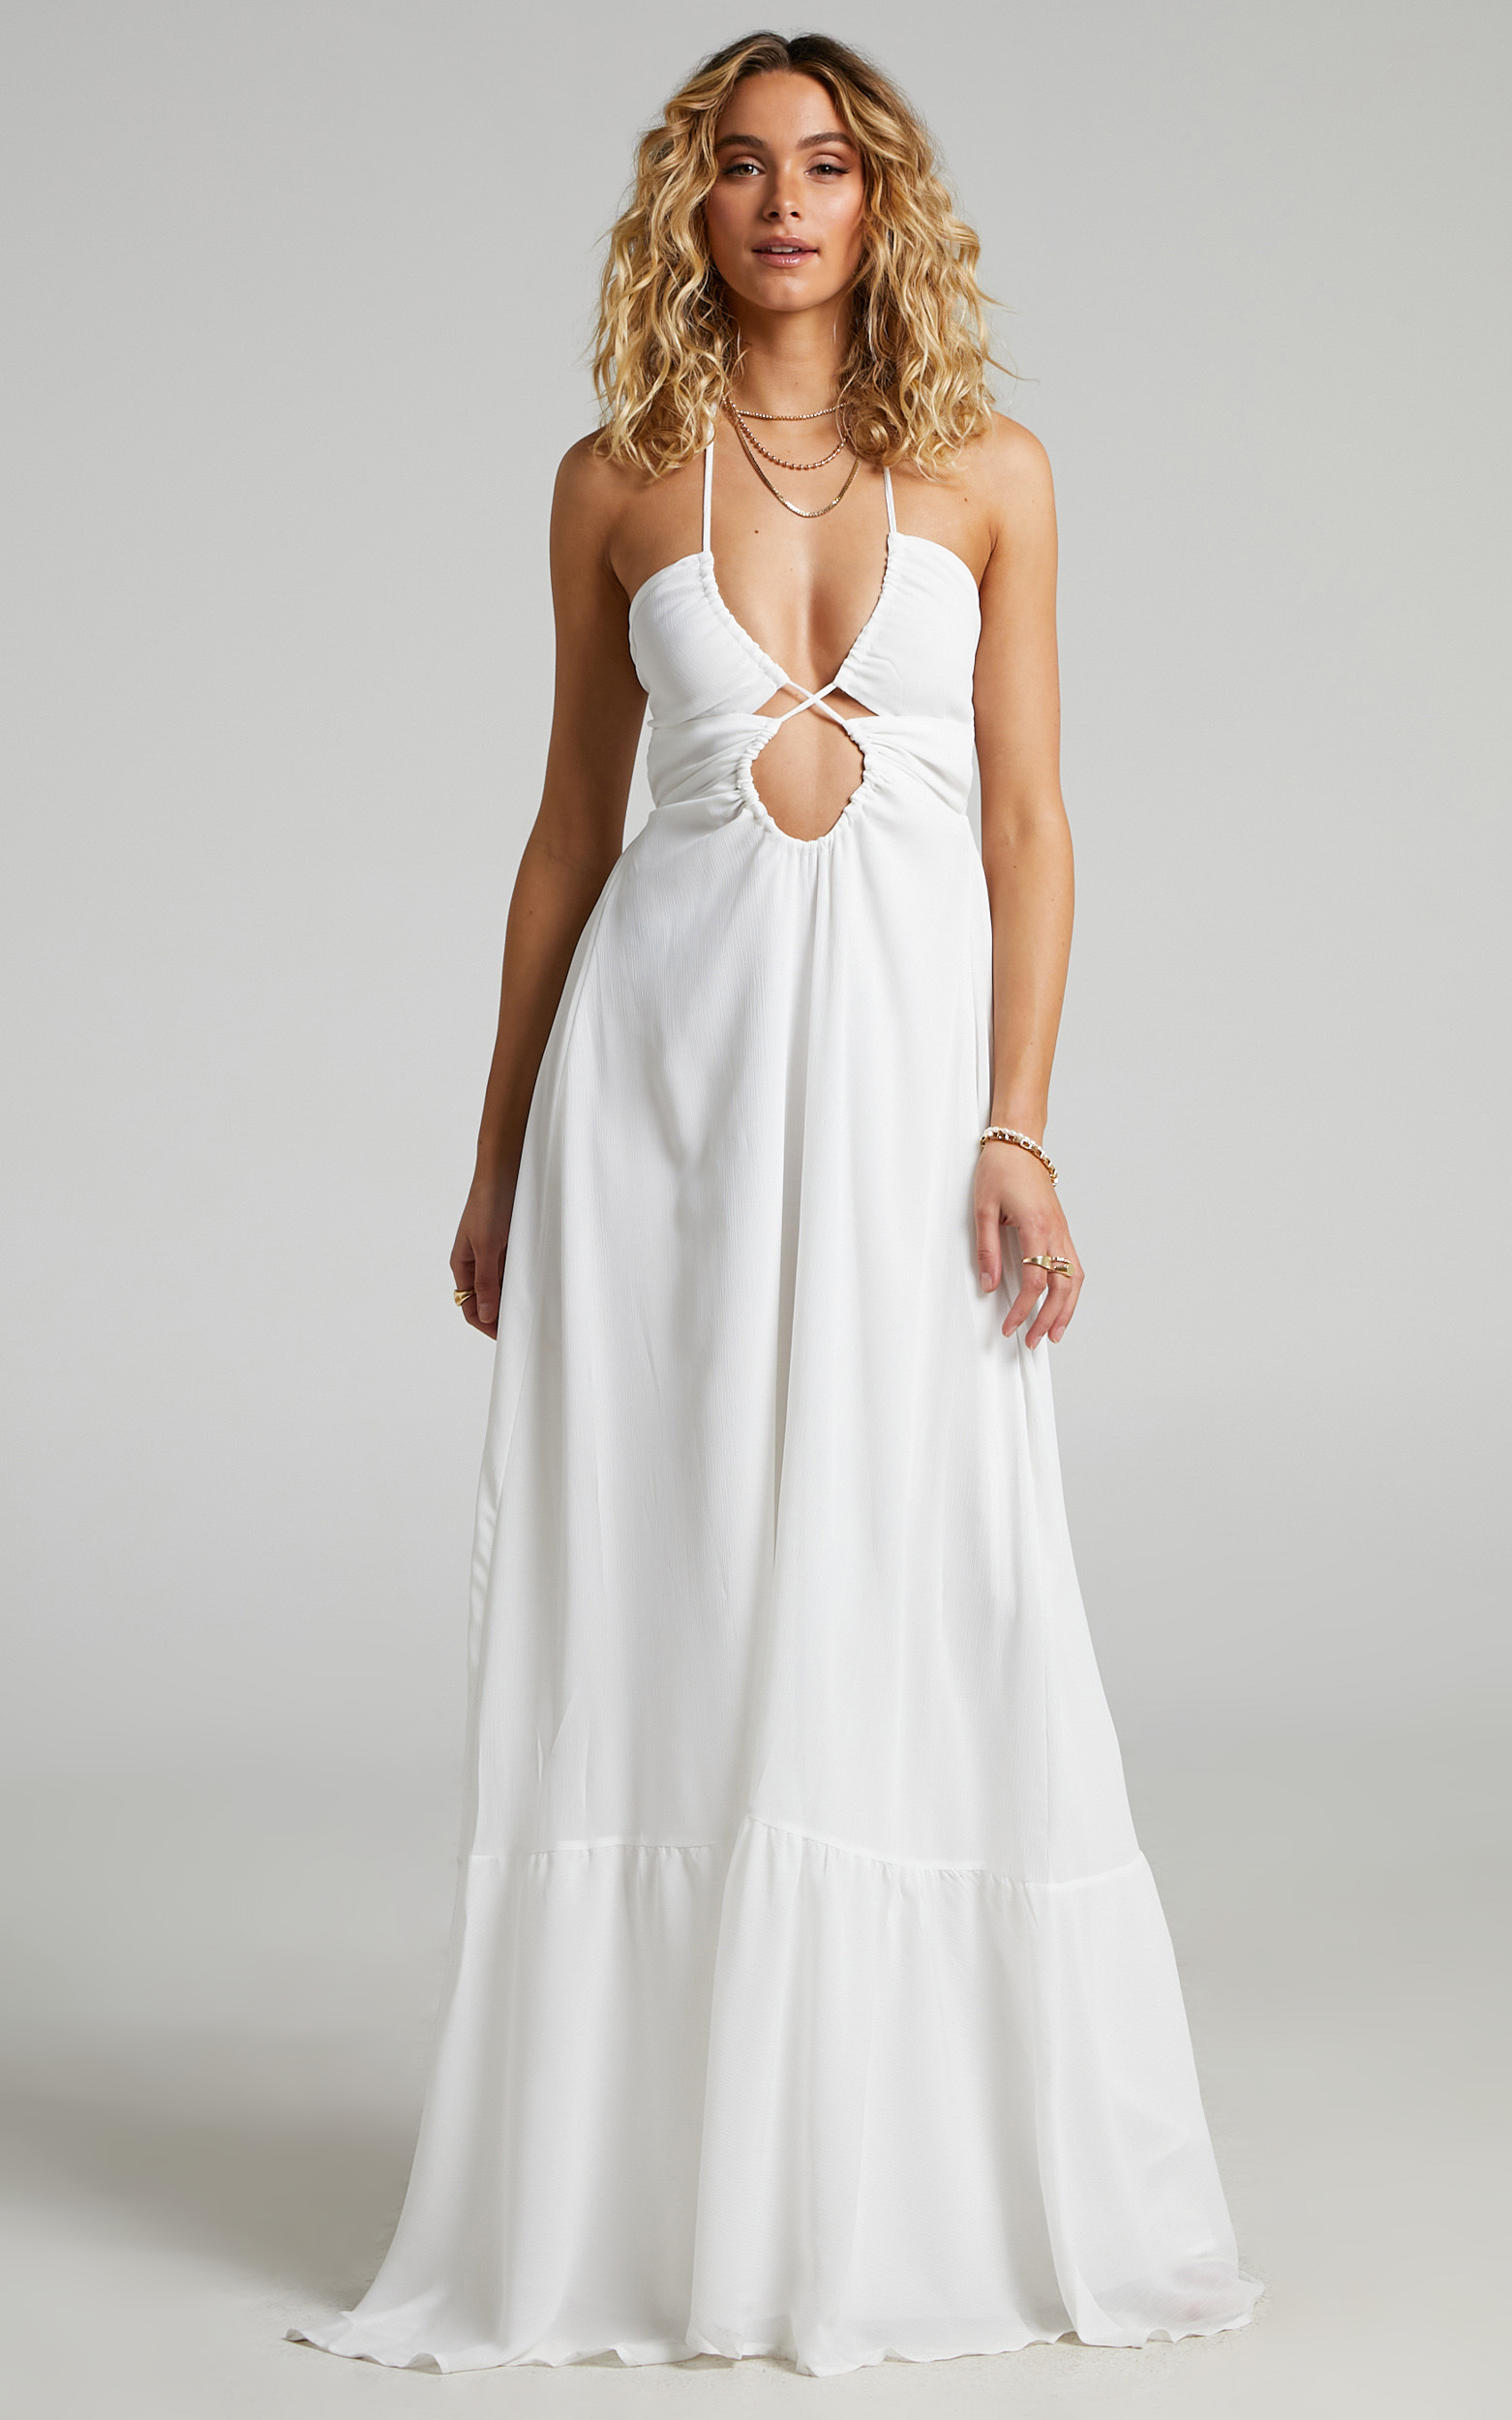 Auroray Cross Front Halter Maxi Dress in White - 06, WHT1, hi-res image number null